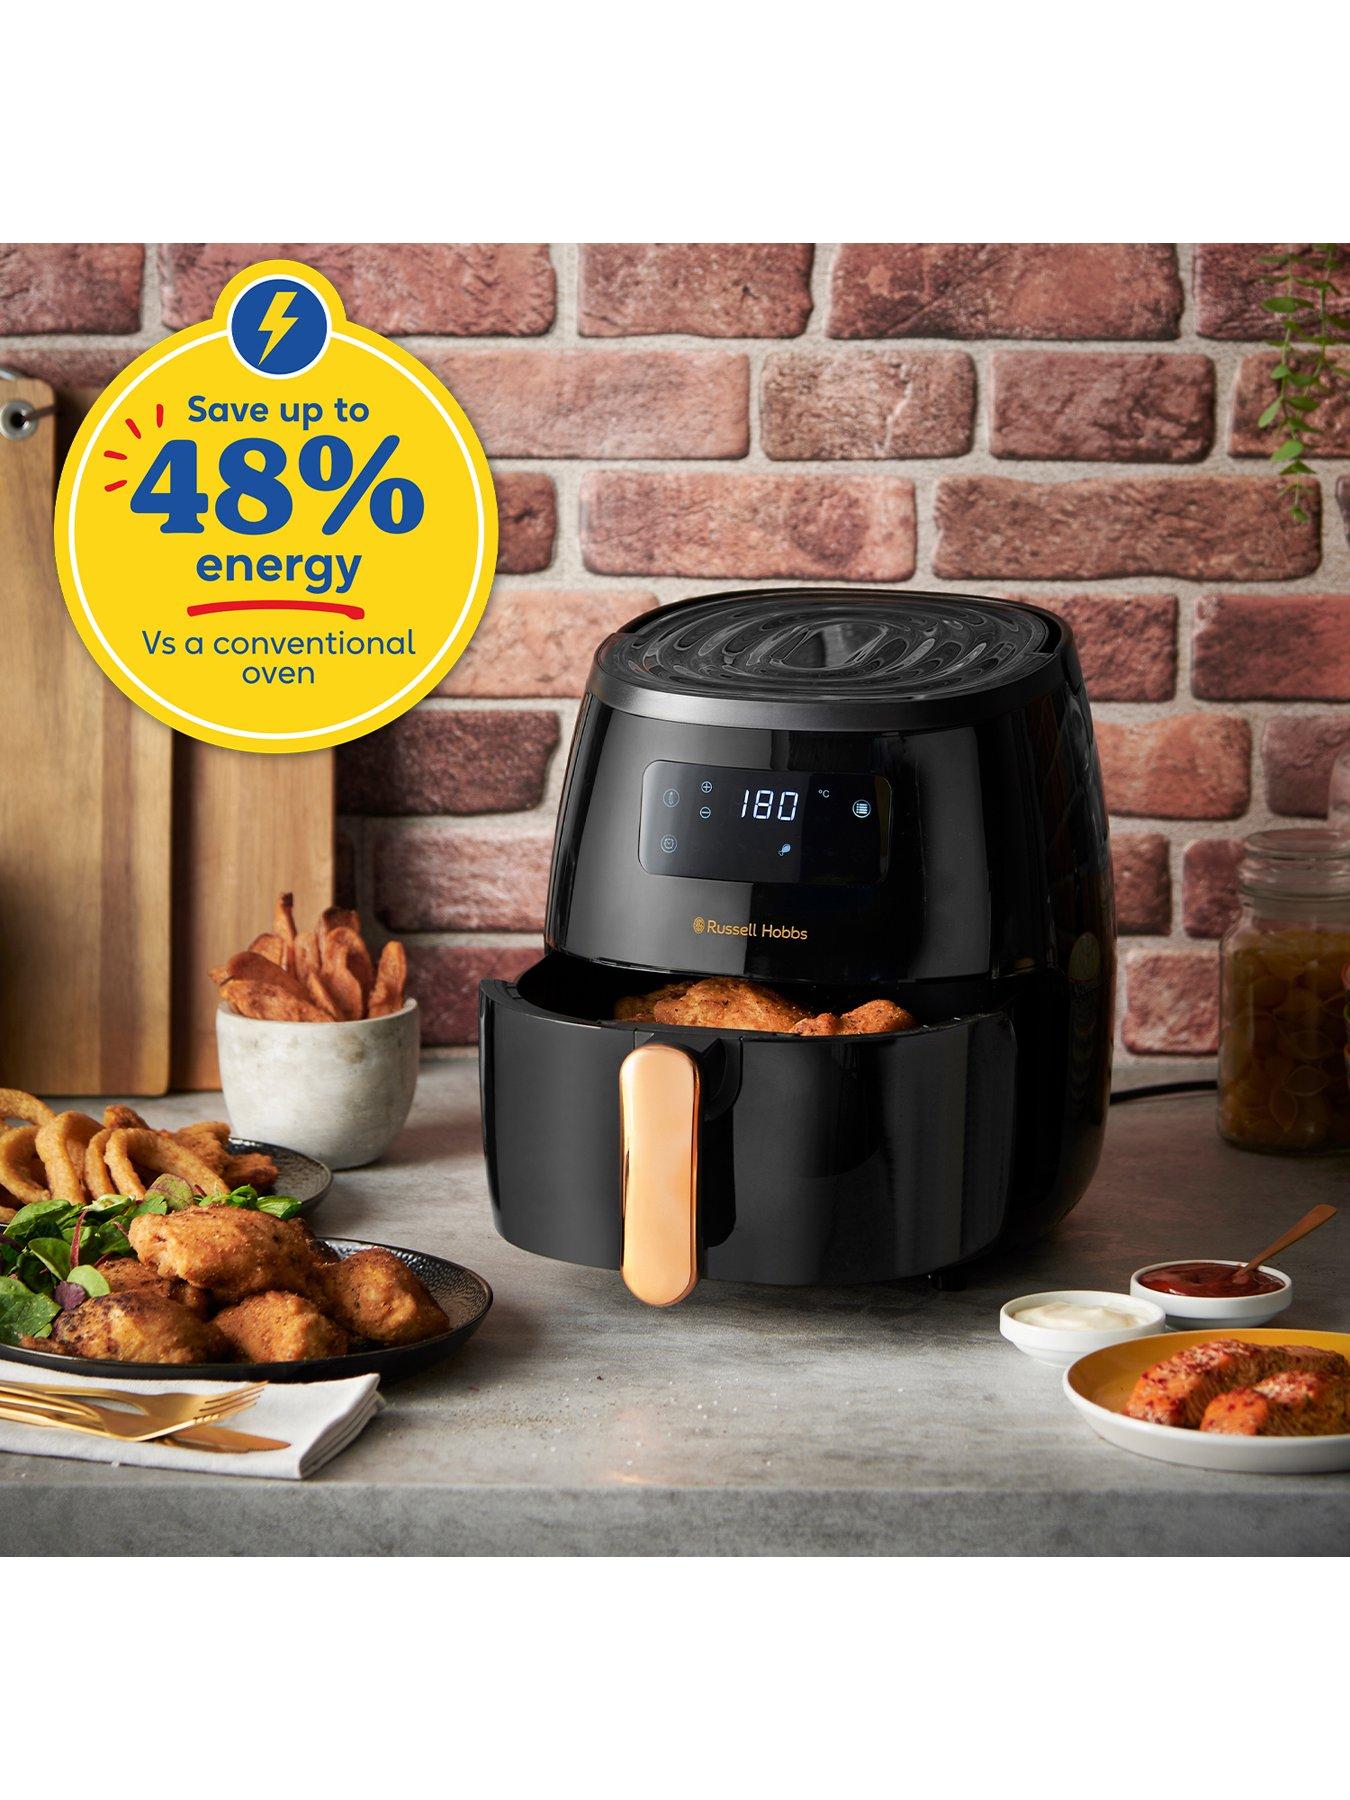 The Russell Hobbs Brooklyn Digital Air Fryer cooks your favourite foods up  to 82% faster* with little or no added oil, while saving up to…